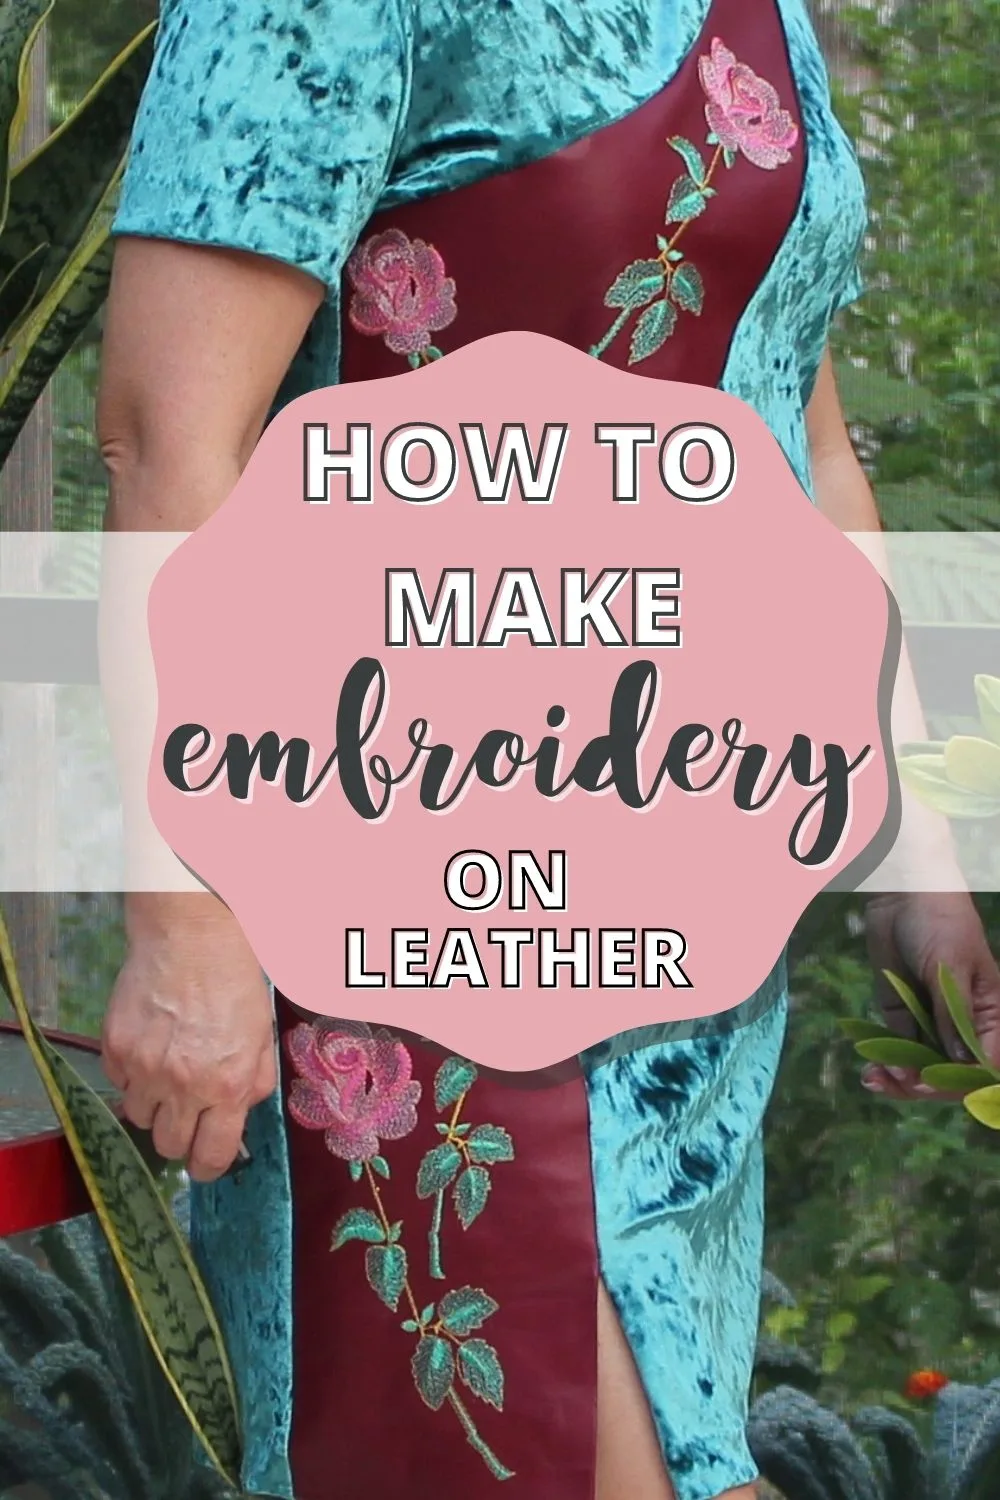 How to make embroidery on leather